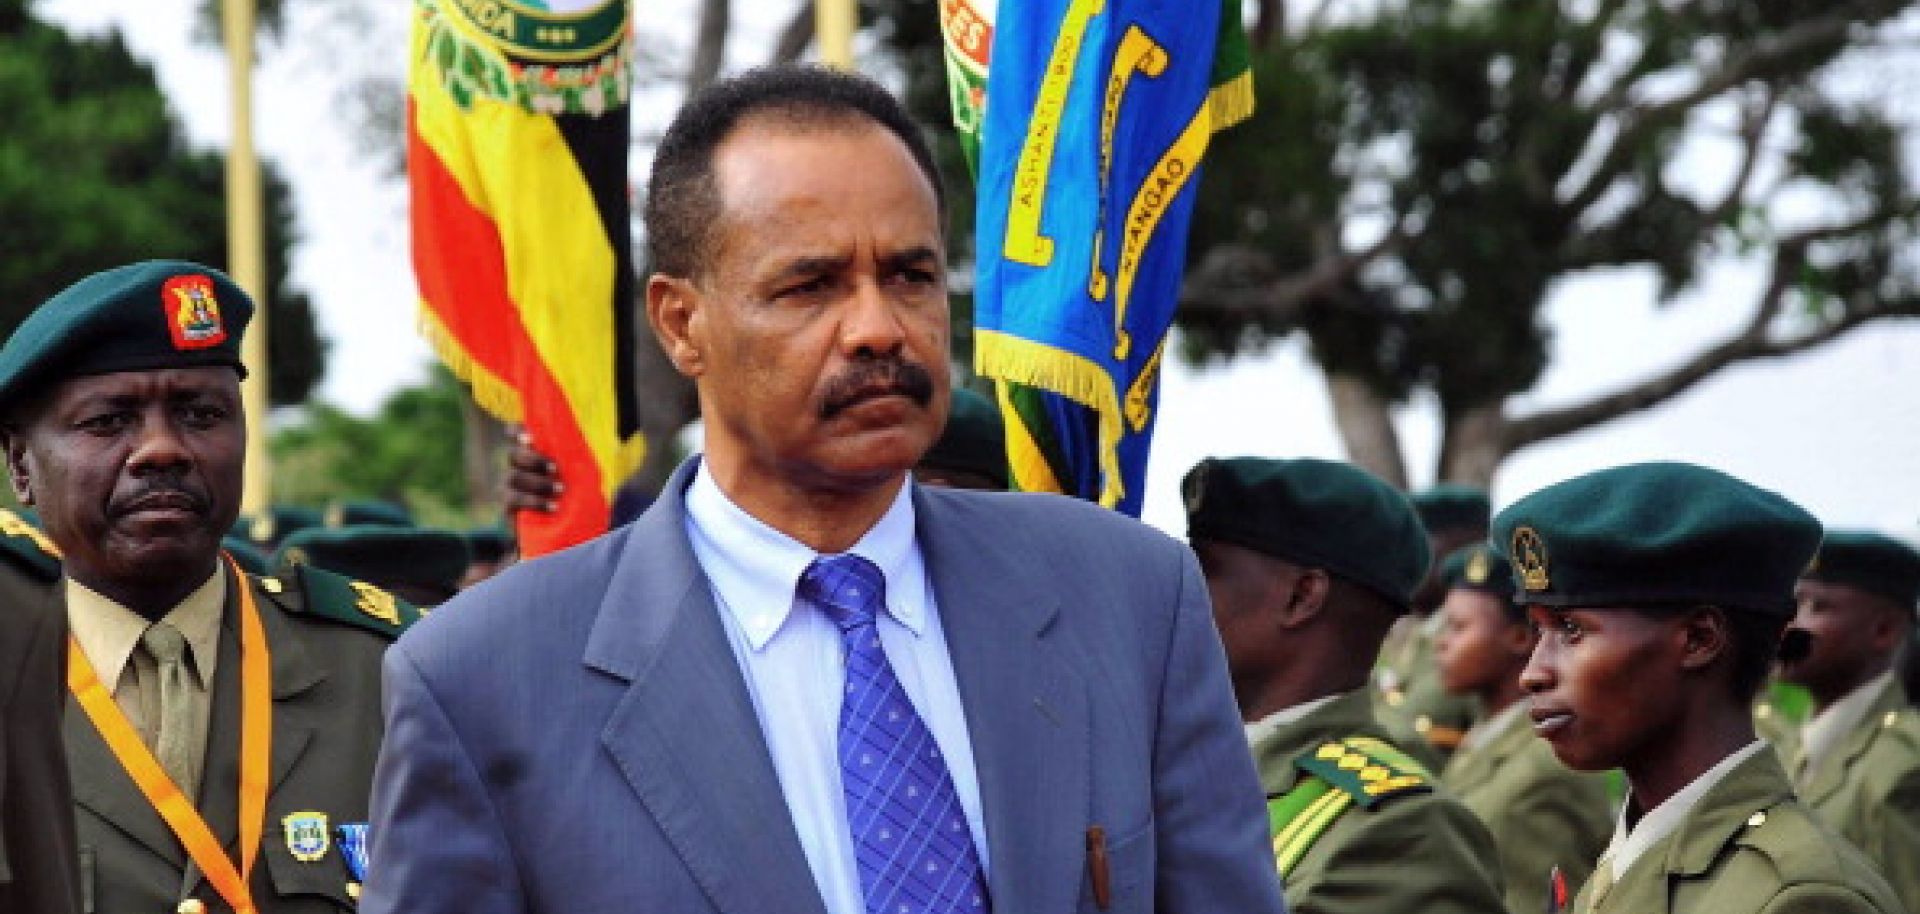 A Possible Coup in Eritrea